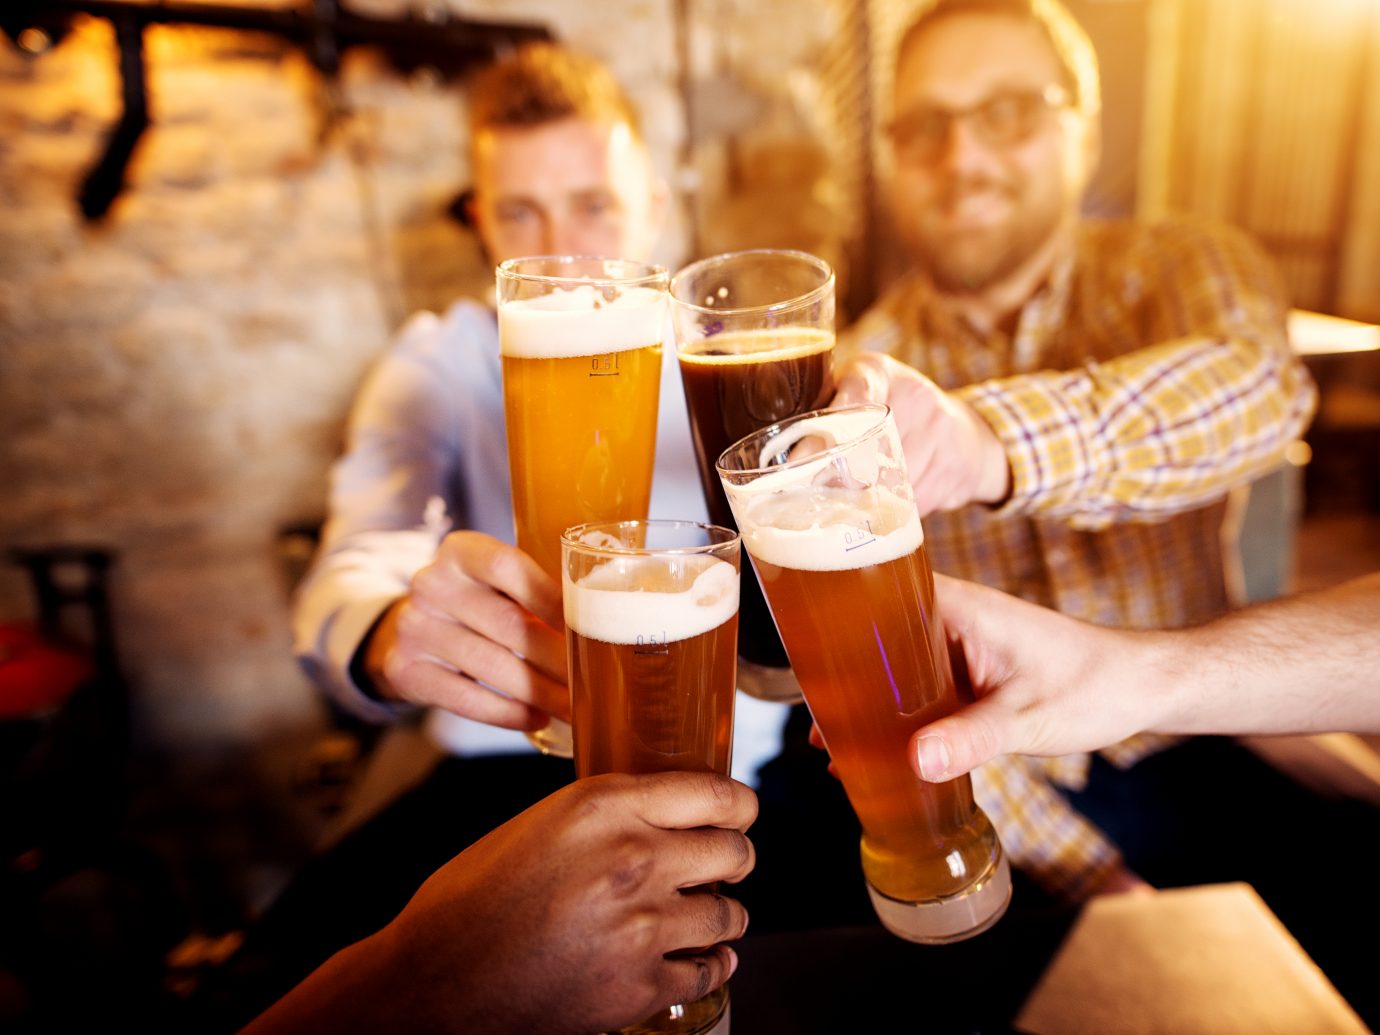 A group of young men clinking glasses with a beer in the sunny pub.